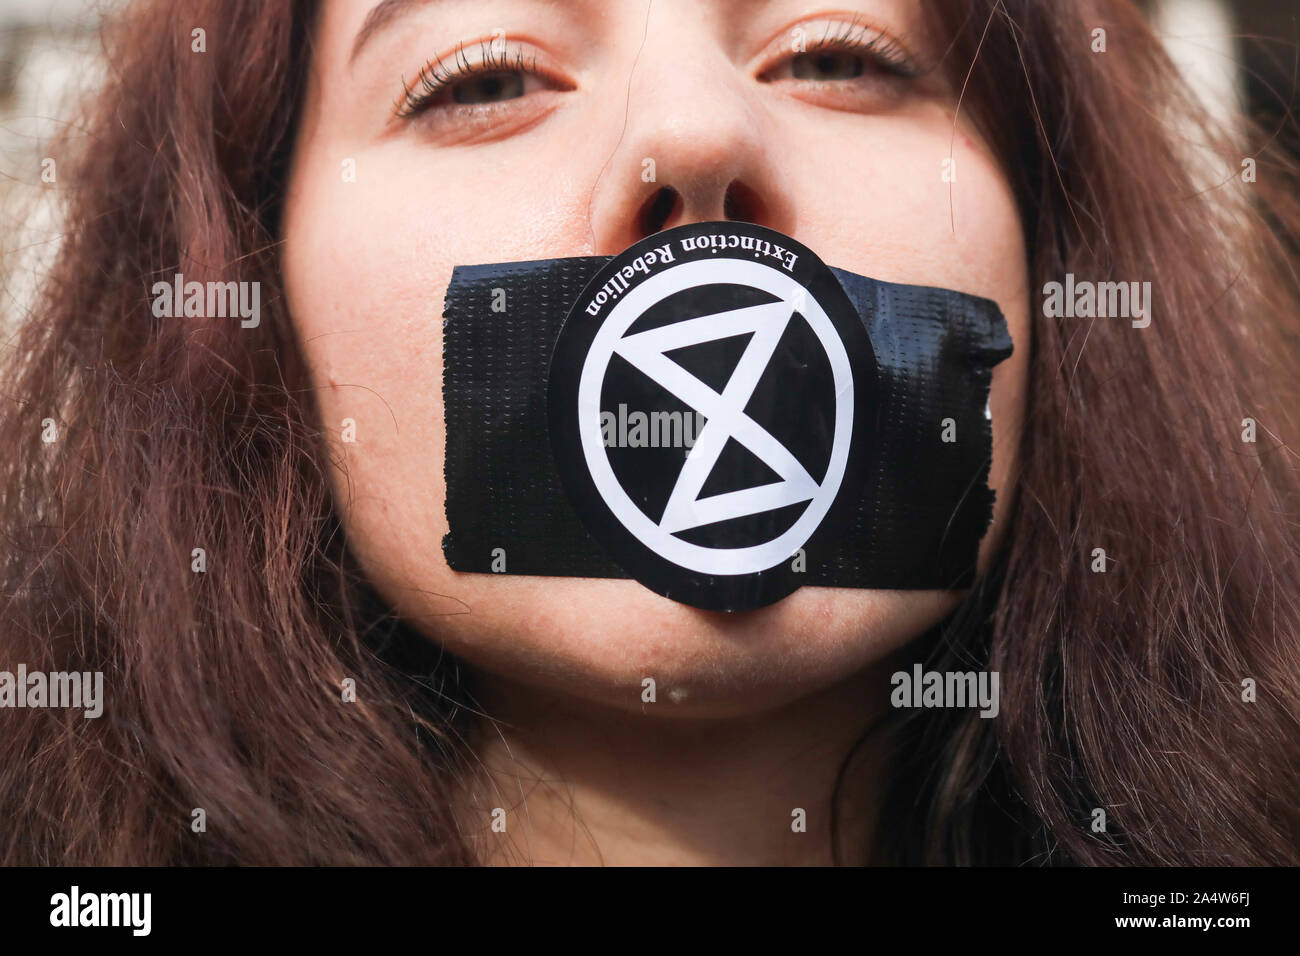 London, UK - 16 October 2019. A climate activist from Extinction rebellion tapes her mouth during  a protest vigil in Trafalgar Square to demonstrate against section 14 of the public order act 1986 impose by the Police banning protests. Extinction Rebellion has sought a judicial review to challenge a London-wide protest ban in the High courts Credit: amer ghazzal/Alamy Live News Stock Photo